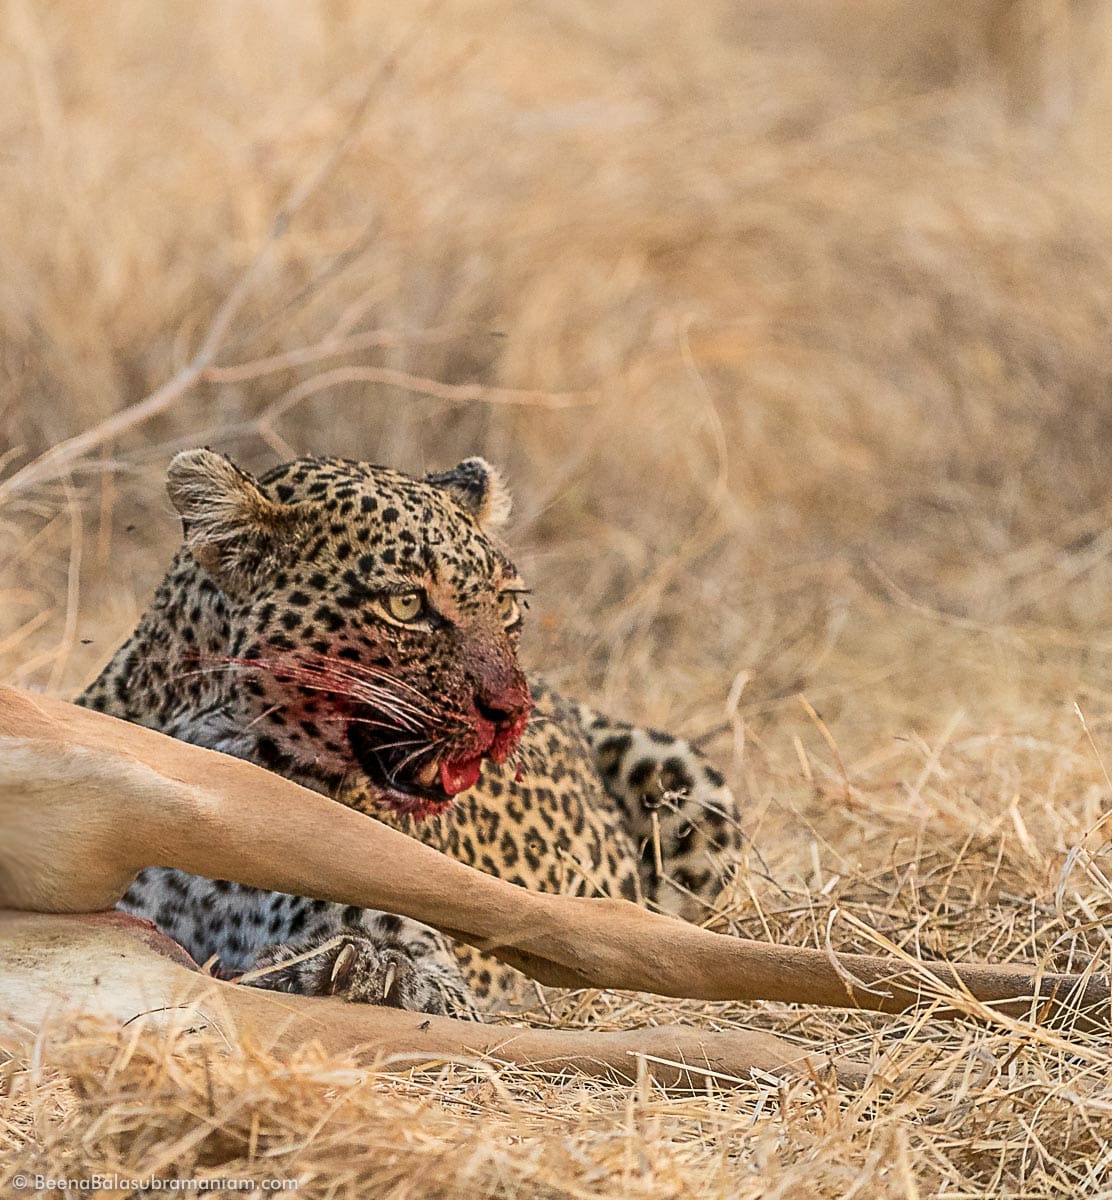 claws, paws and tsetse in Ruaha